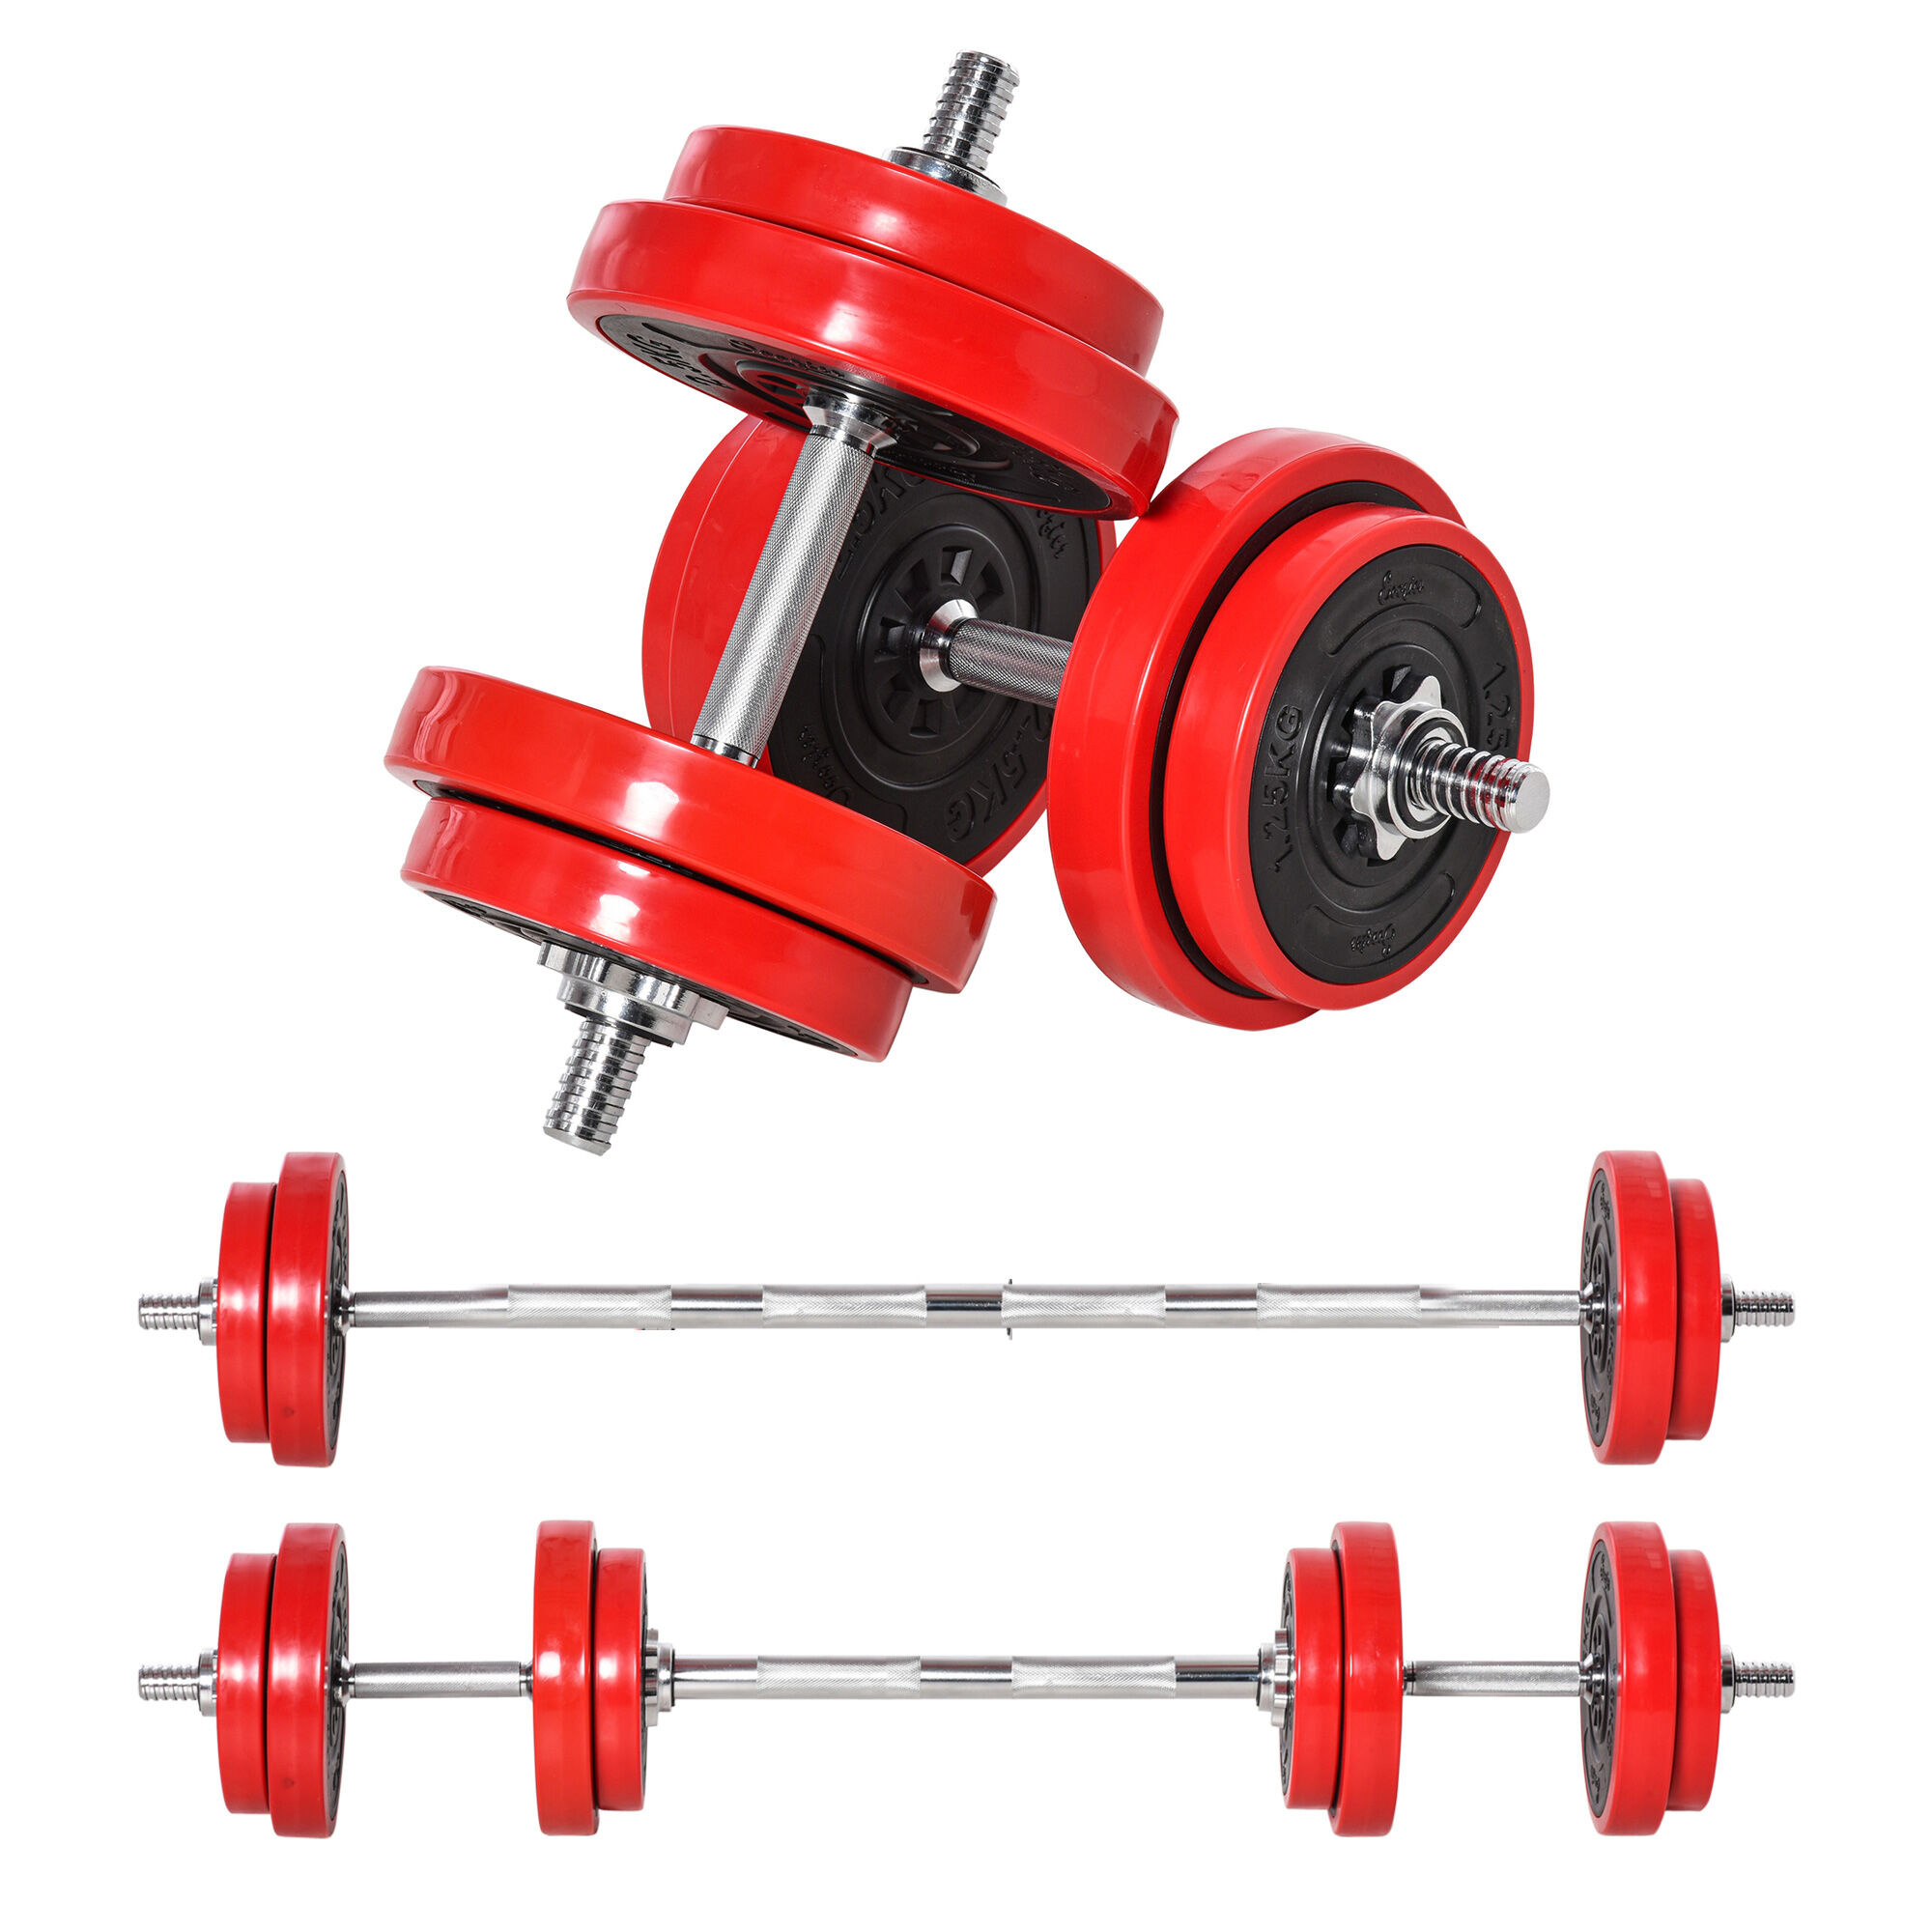 Soozier Adjustable Barbell Weight Set 44 Lbs 2-in-1 Dumbbell Home Gym Strength Training for Arms Shoulders Back Red Black   Aosom.com